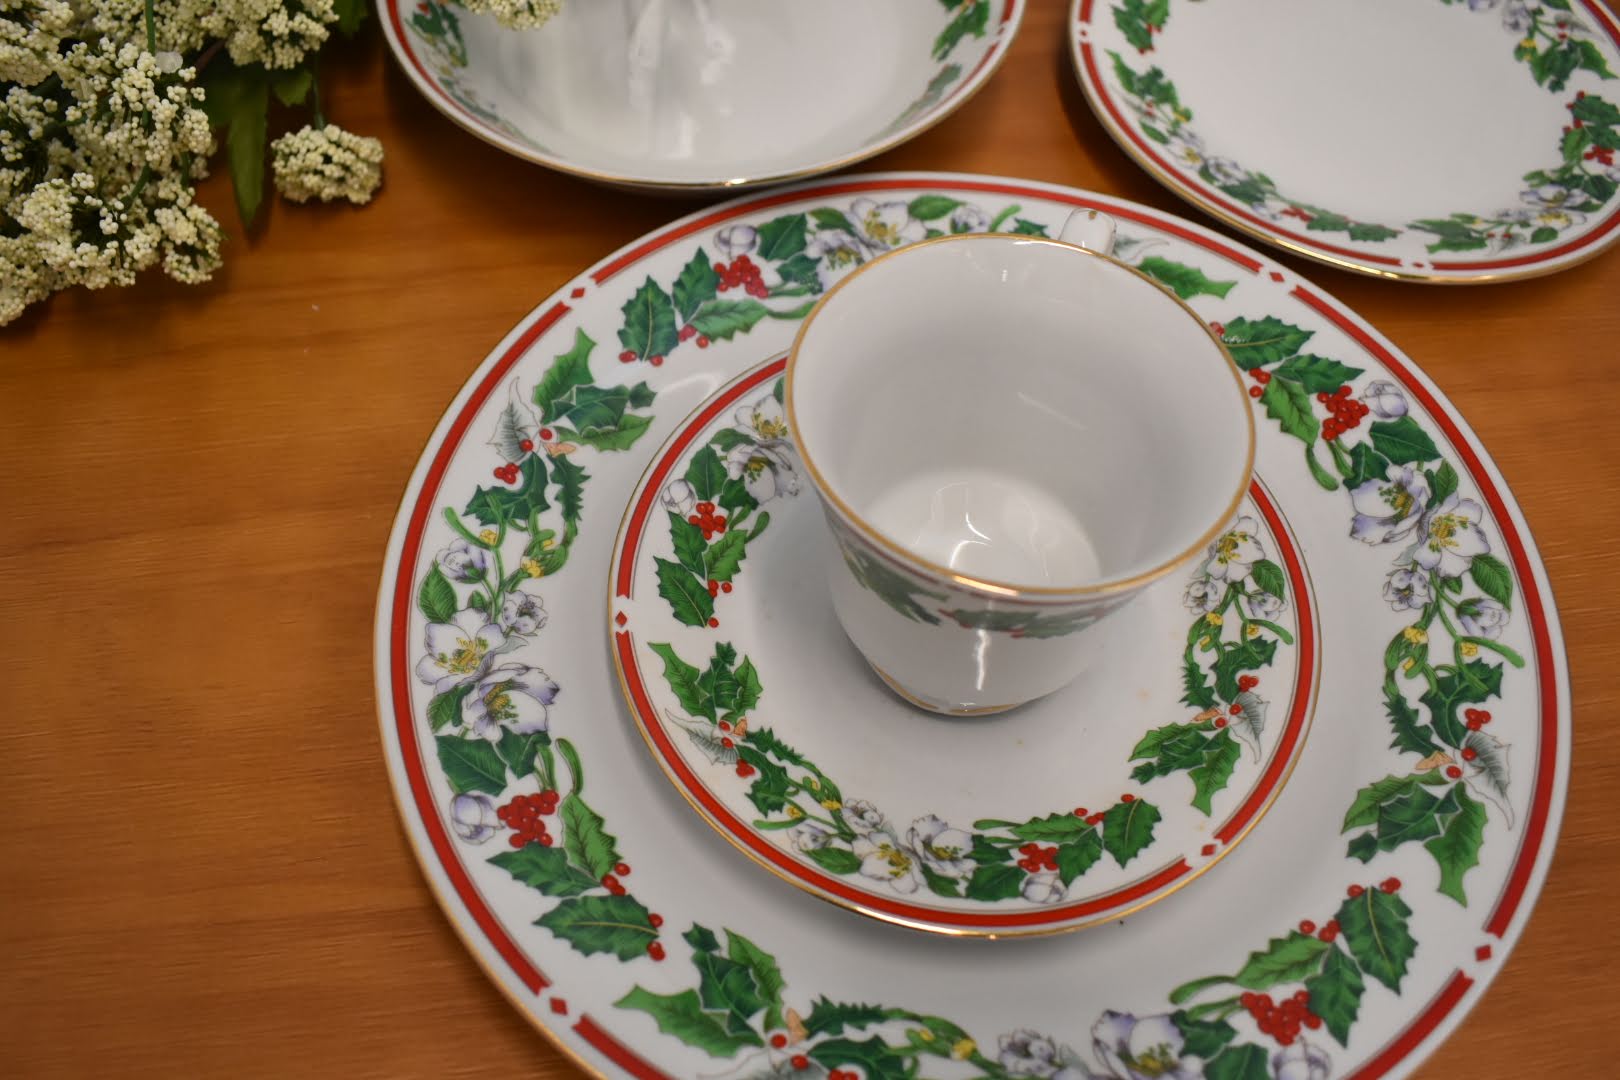 St. Maria 5-Piece Dinner Set - 1 place setting - Fine Porcelain China, Holiday Holly Design